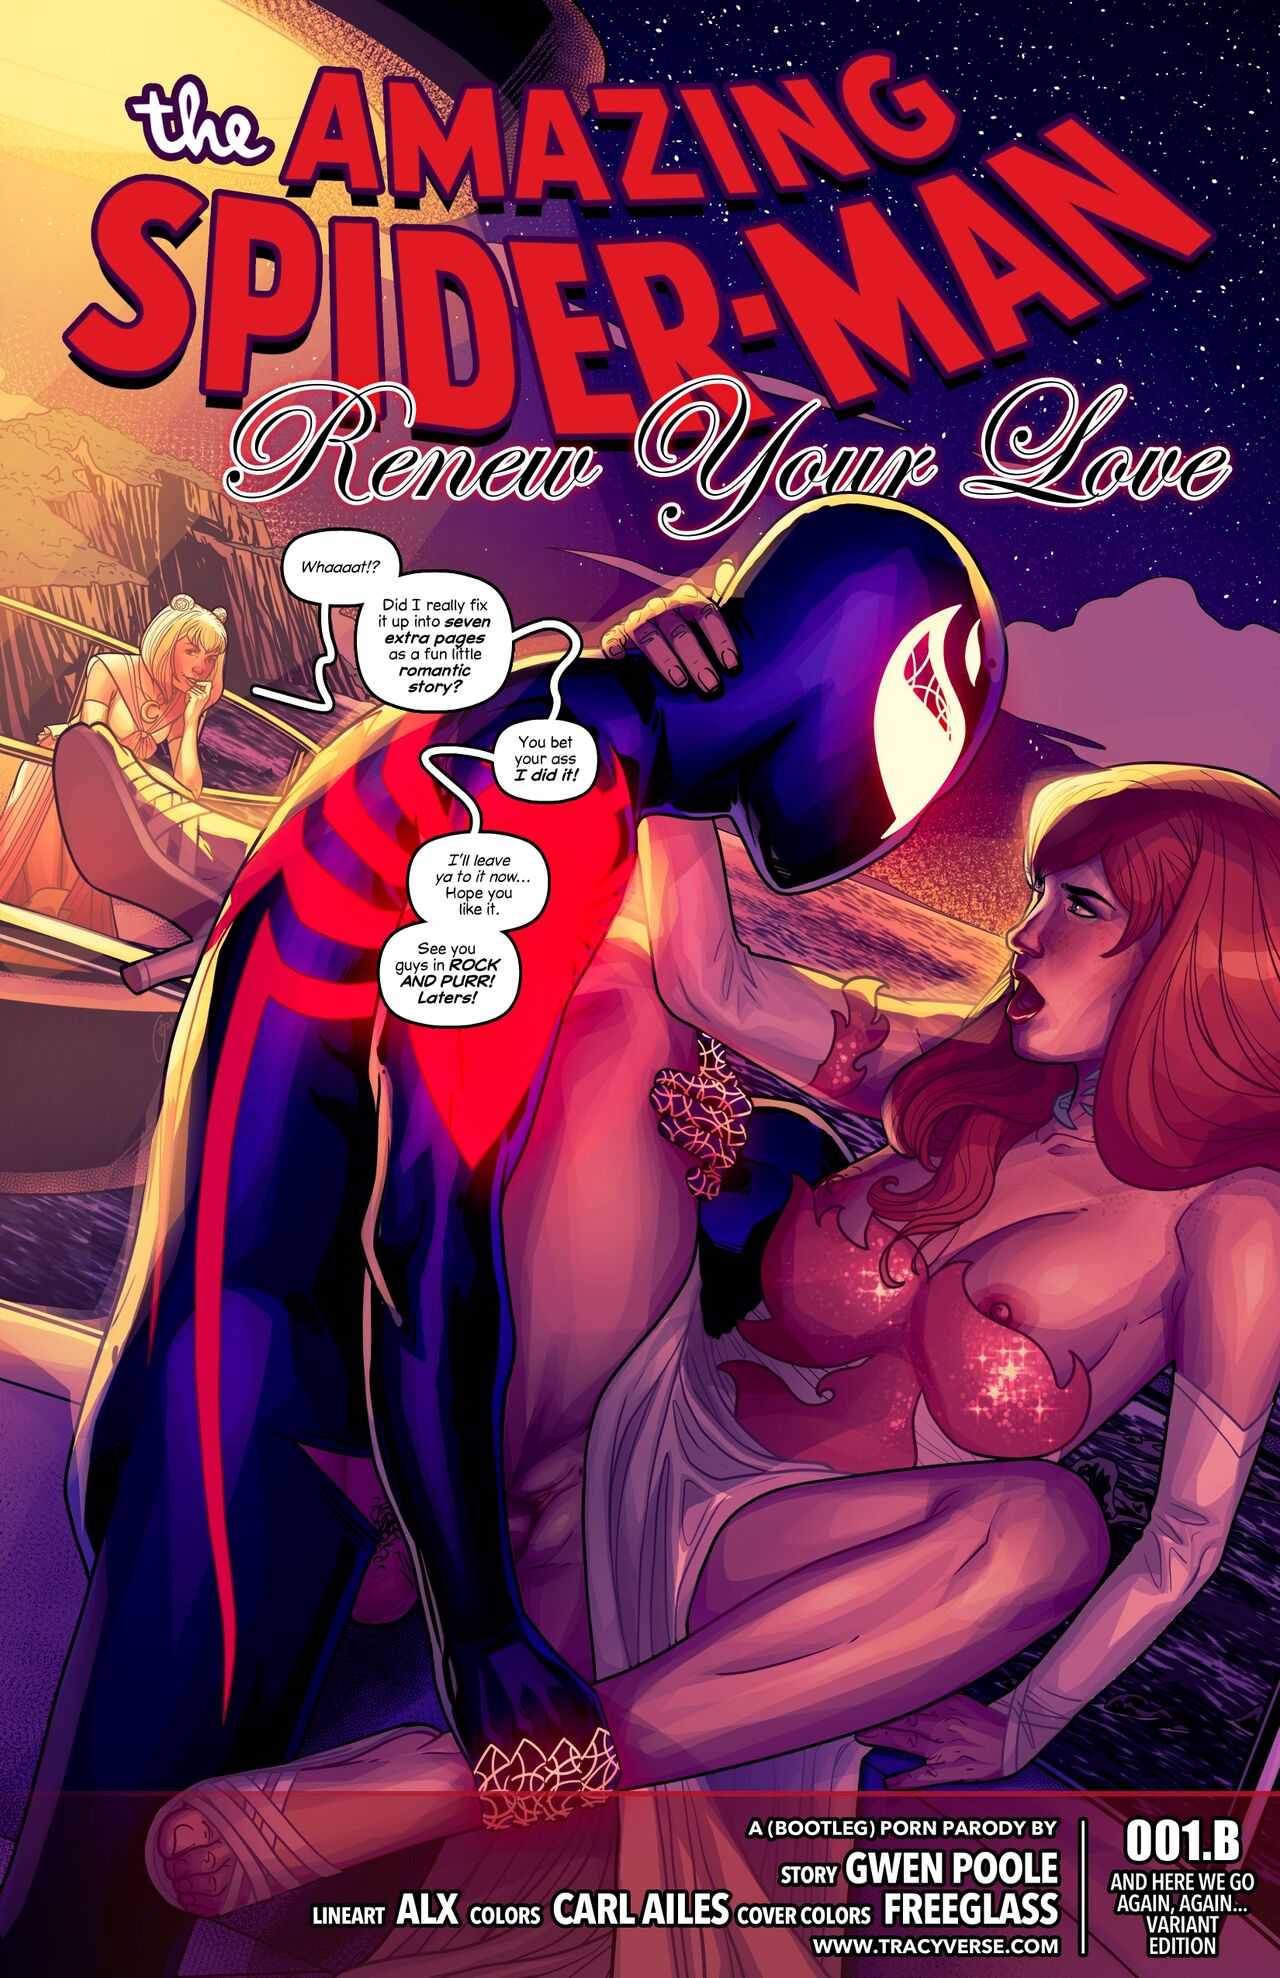 Renew Your Lust (Spider-Man) Tracy Scops - Comics Army